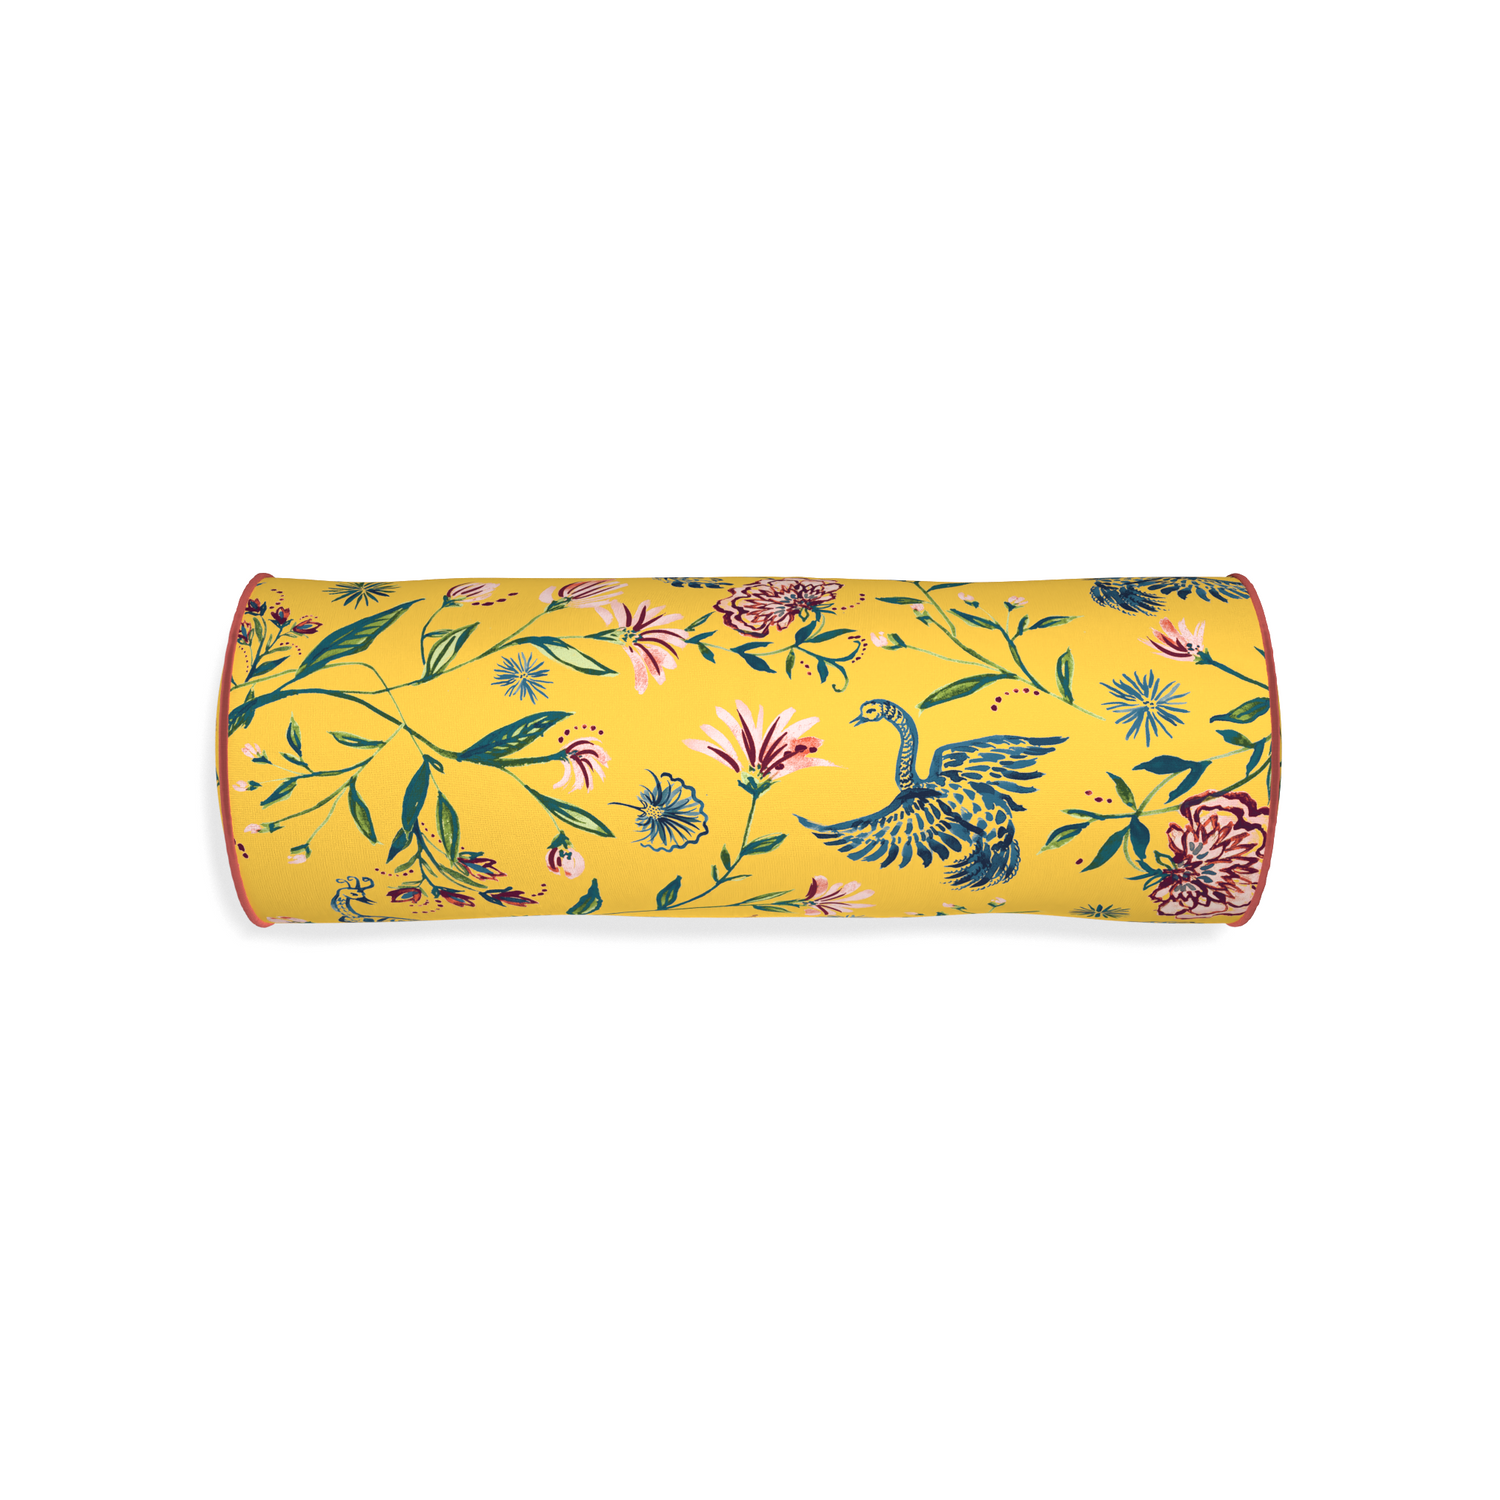 Bolster daphne canary custom yellow chinoiseriepillow with c piping on white background